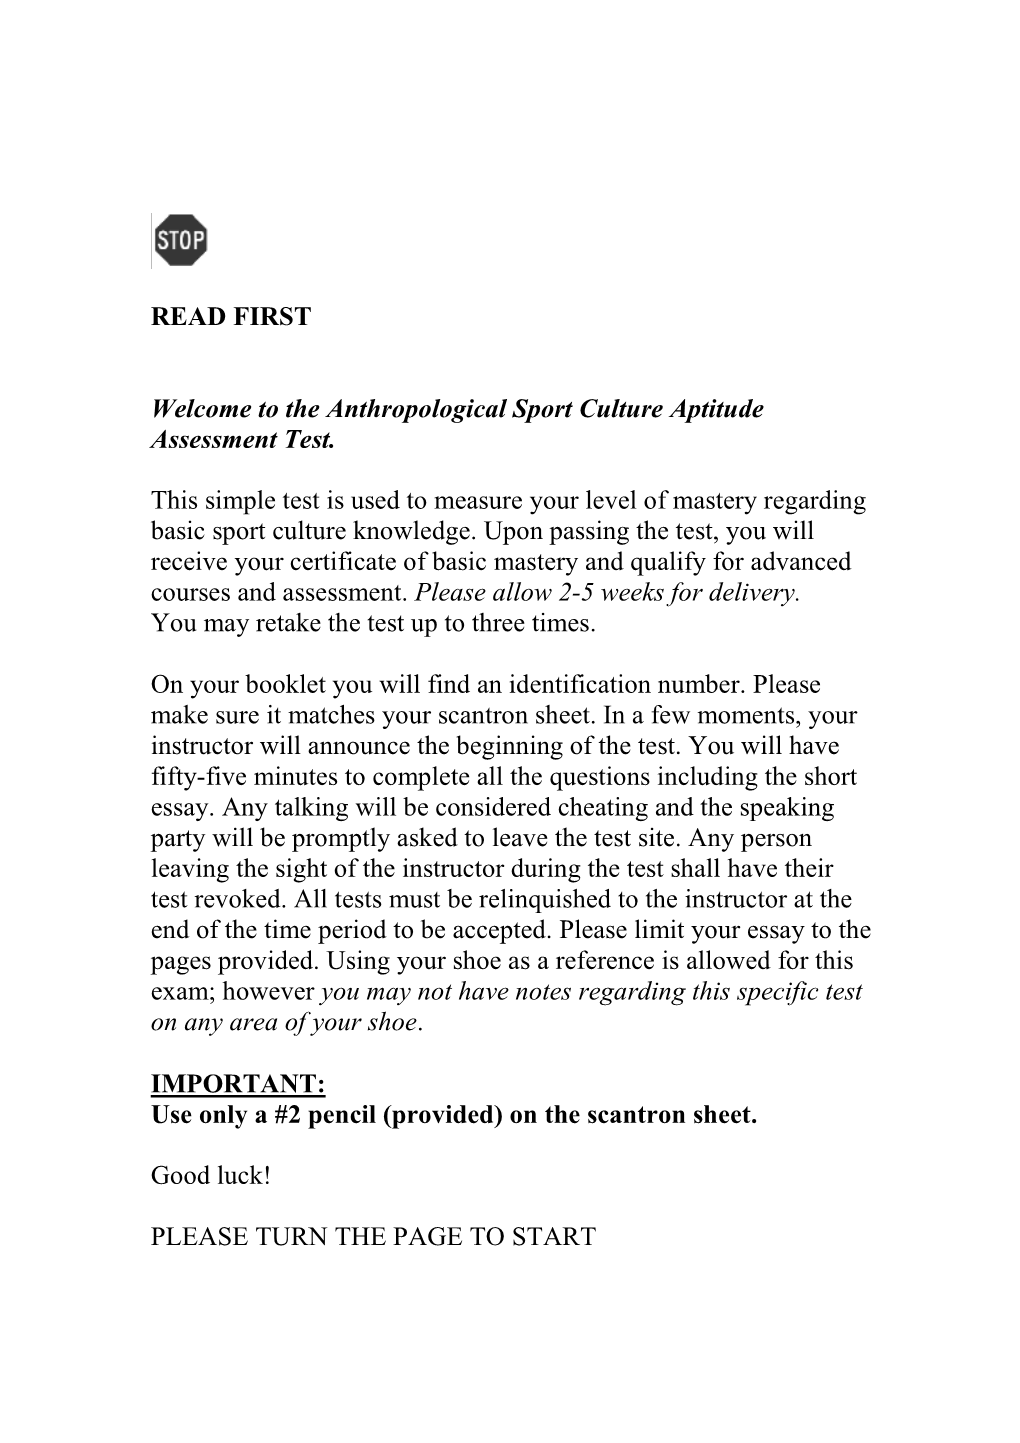 READ FIRST Welcome to the Anthropological Sport Culture